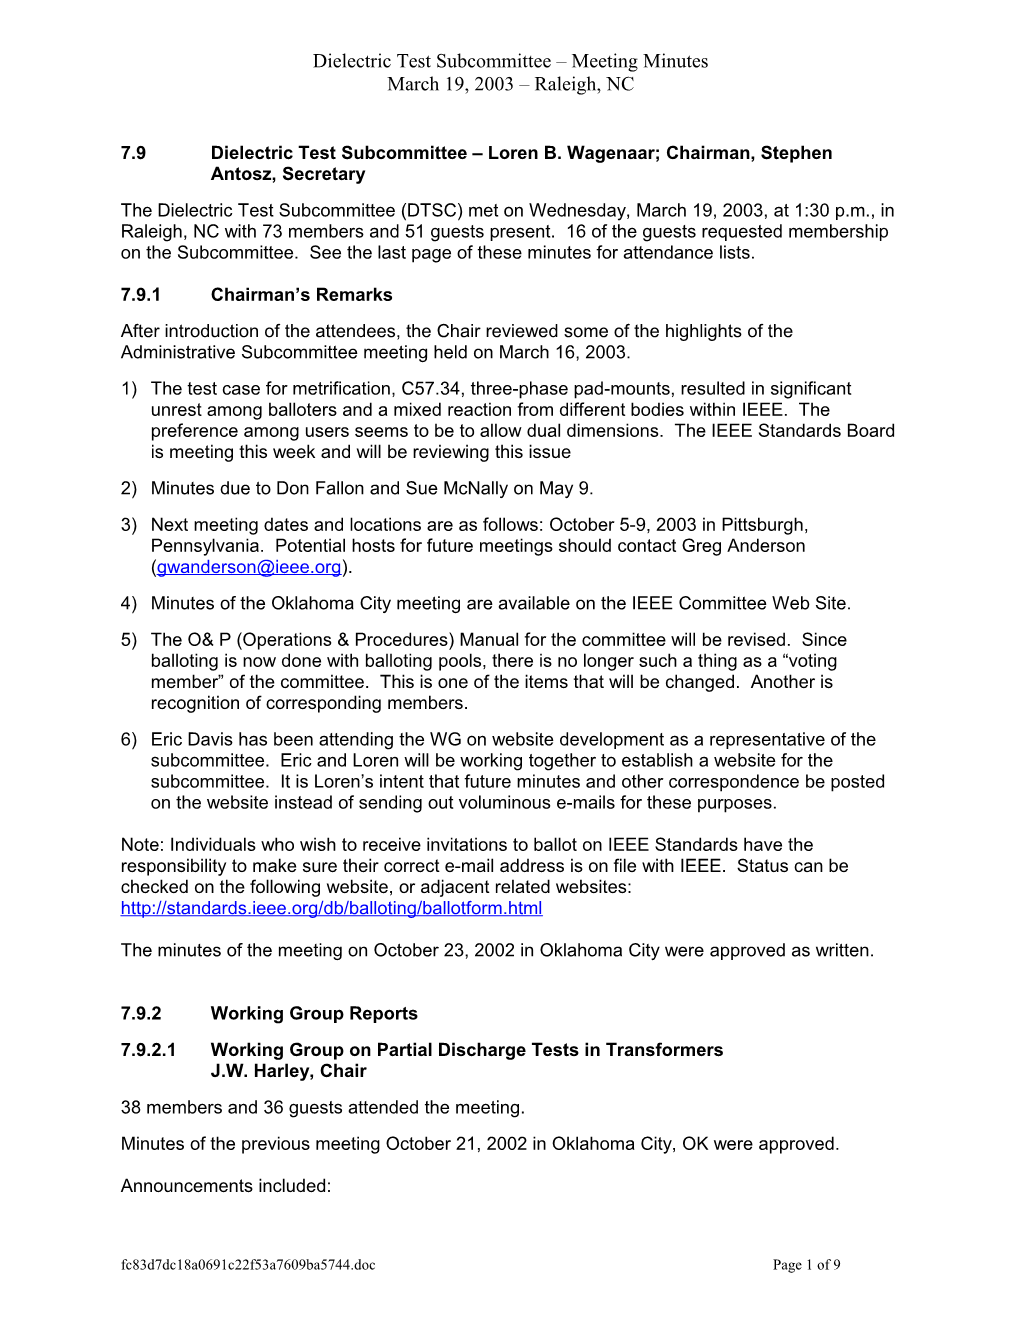 Dielectric Test Subcommittee Minutes